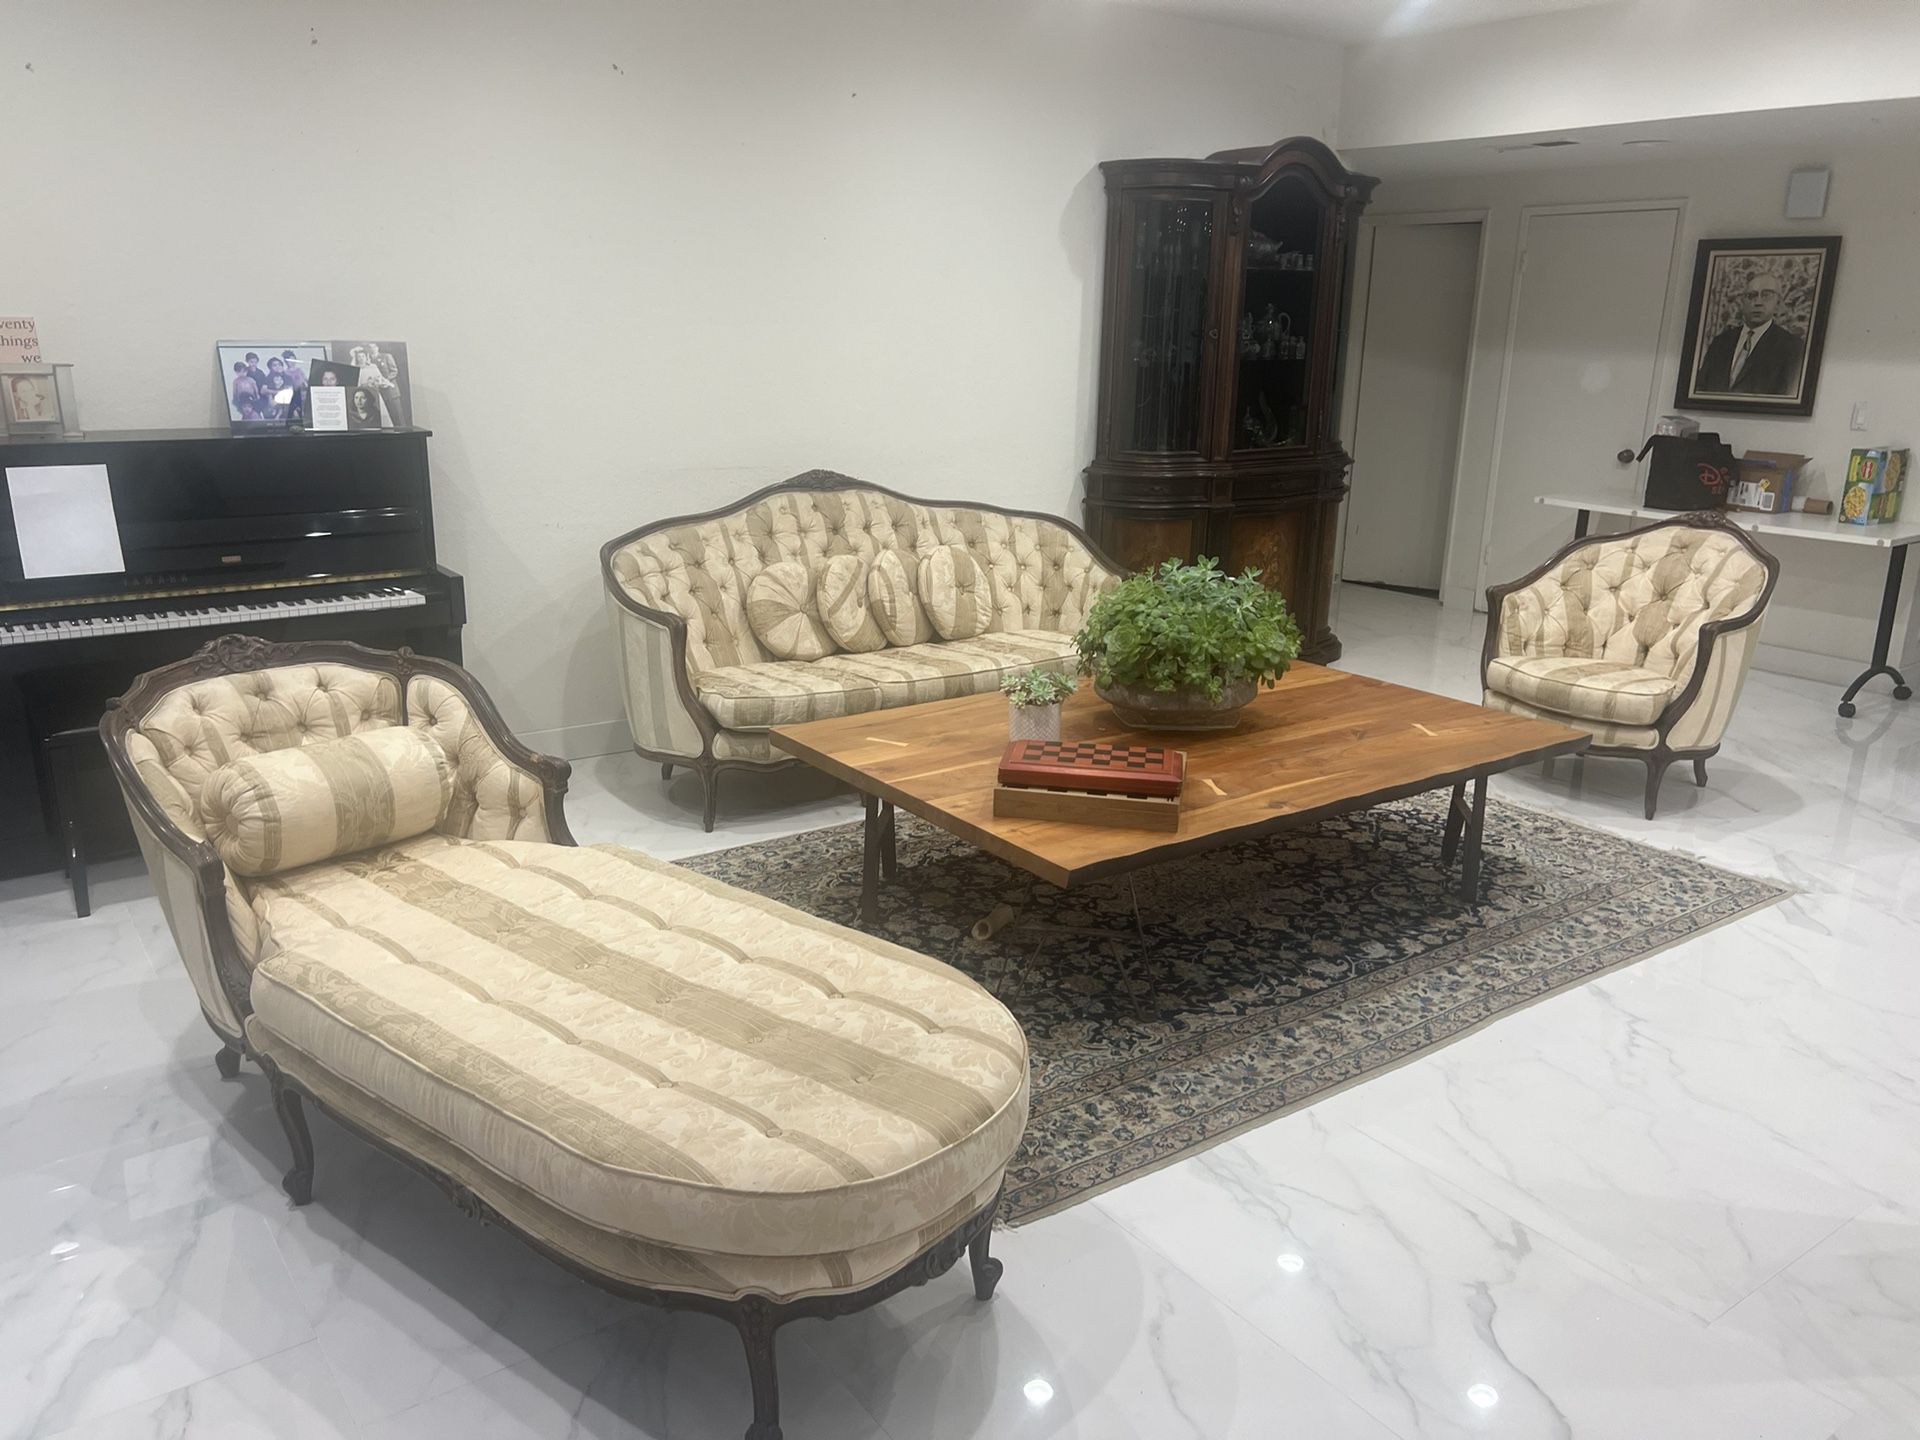 Italian Style Antique Look Sofa, Daybed, And Armchair! Must See!